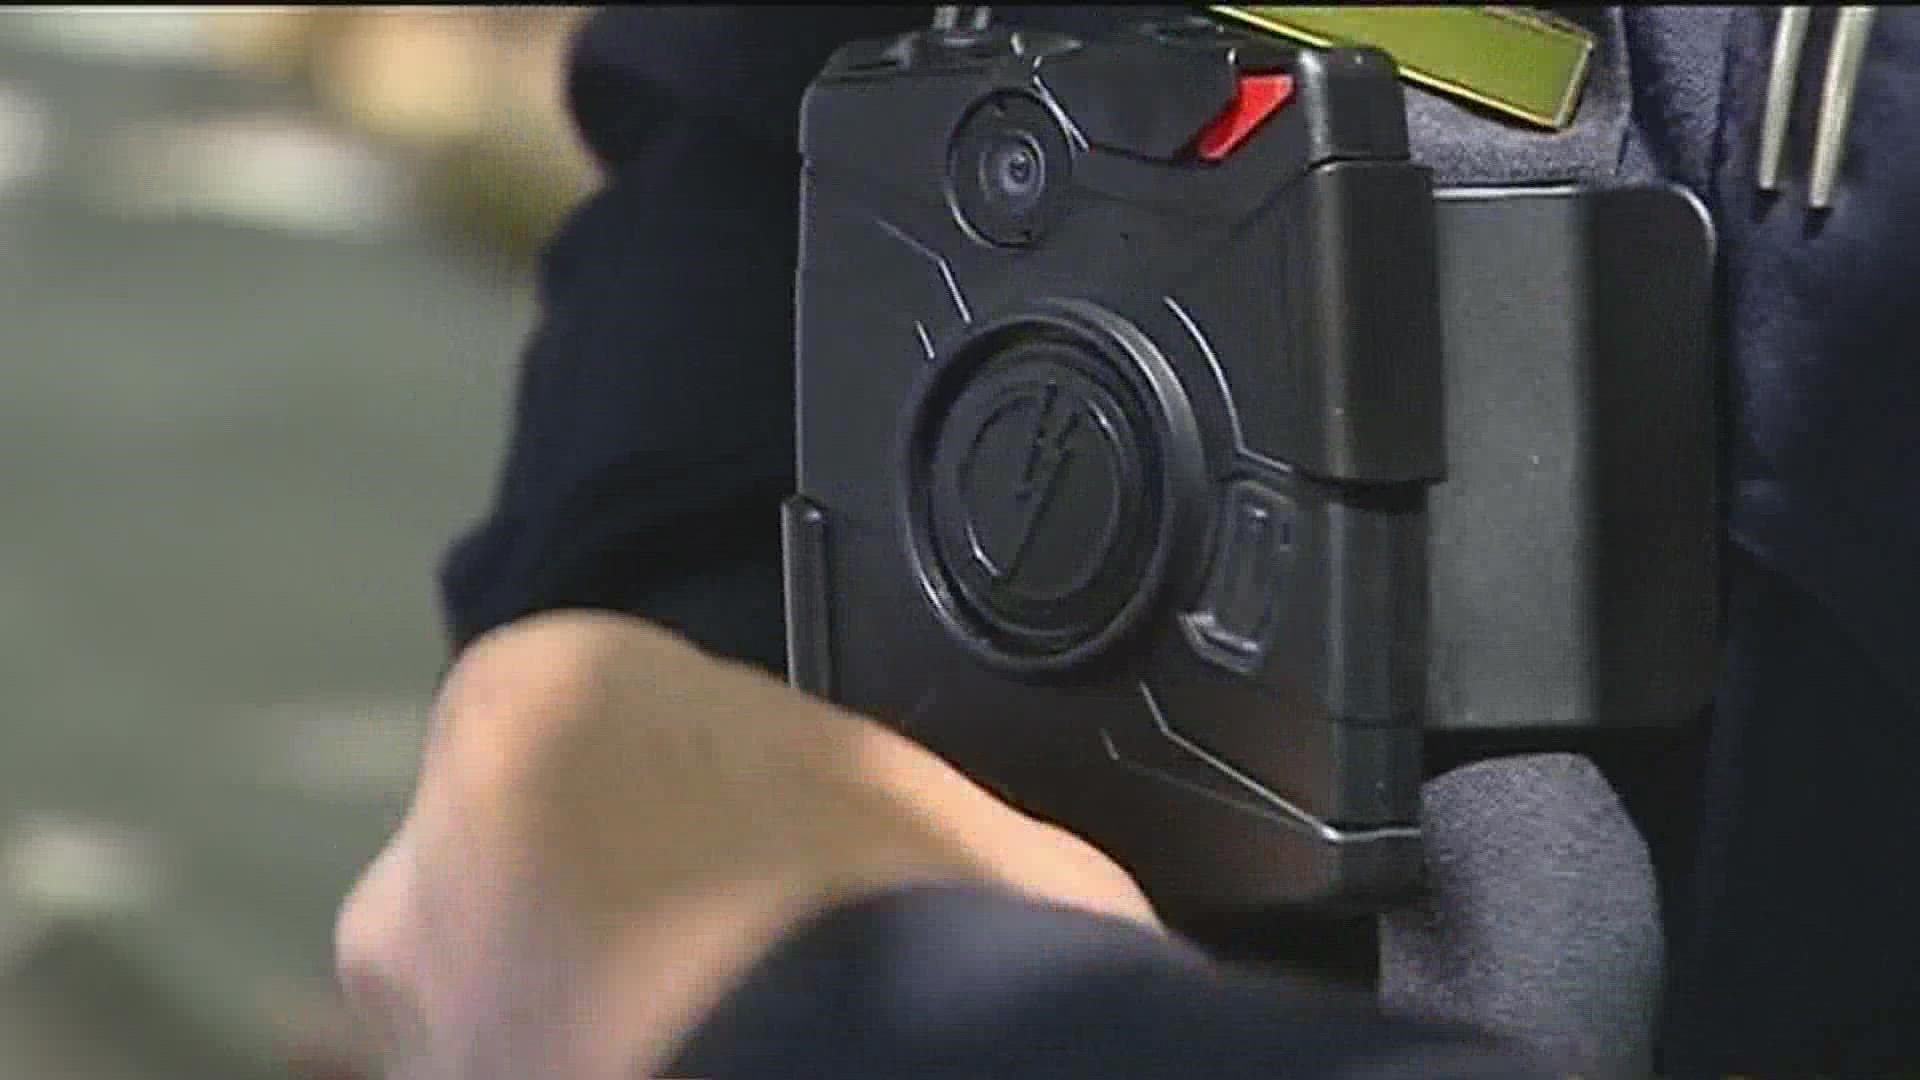 Up to 40% of officers didn't press record on their bodycams during enforcement encounters, according to the City Auditor's report.